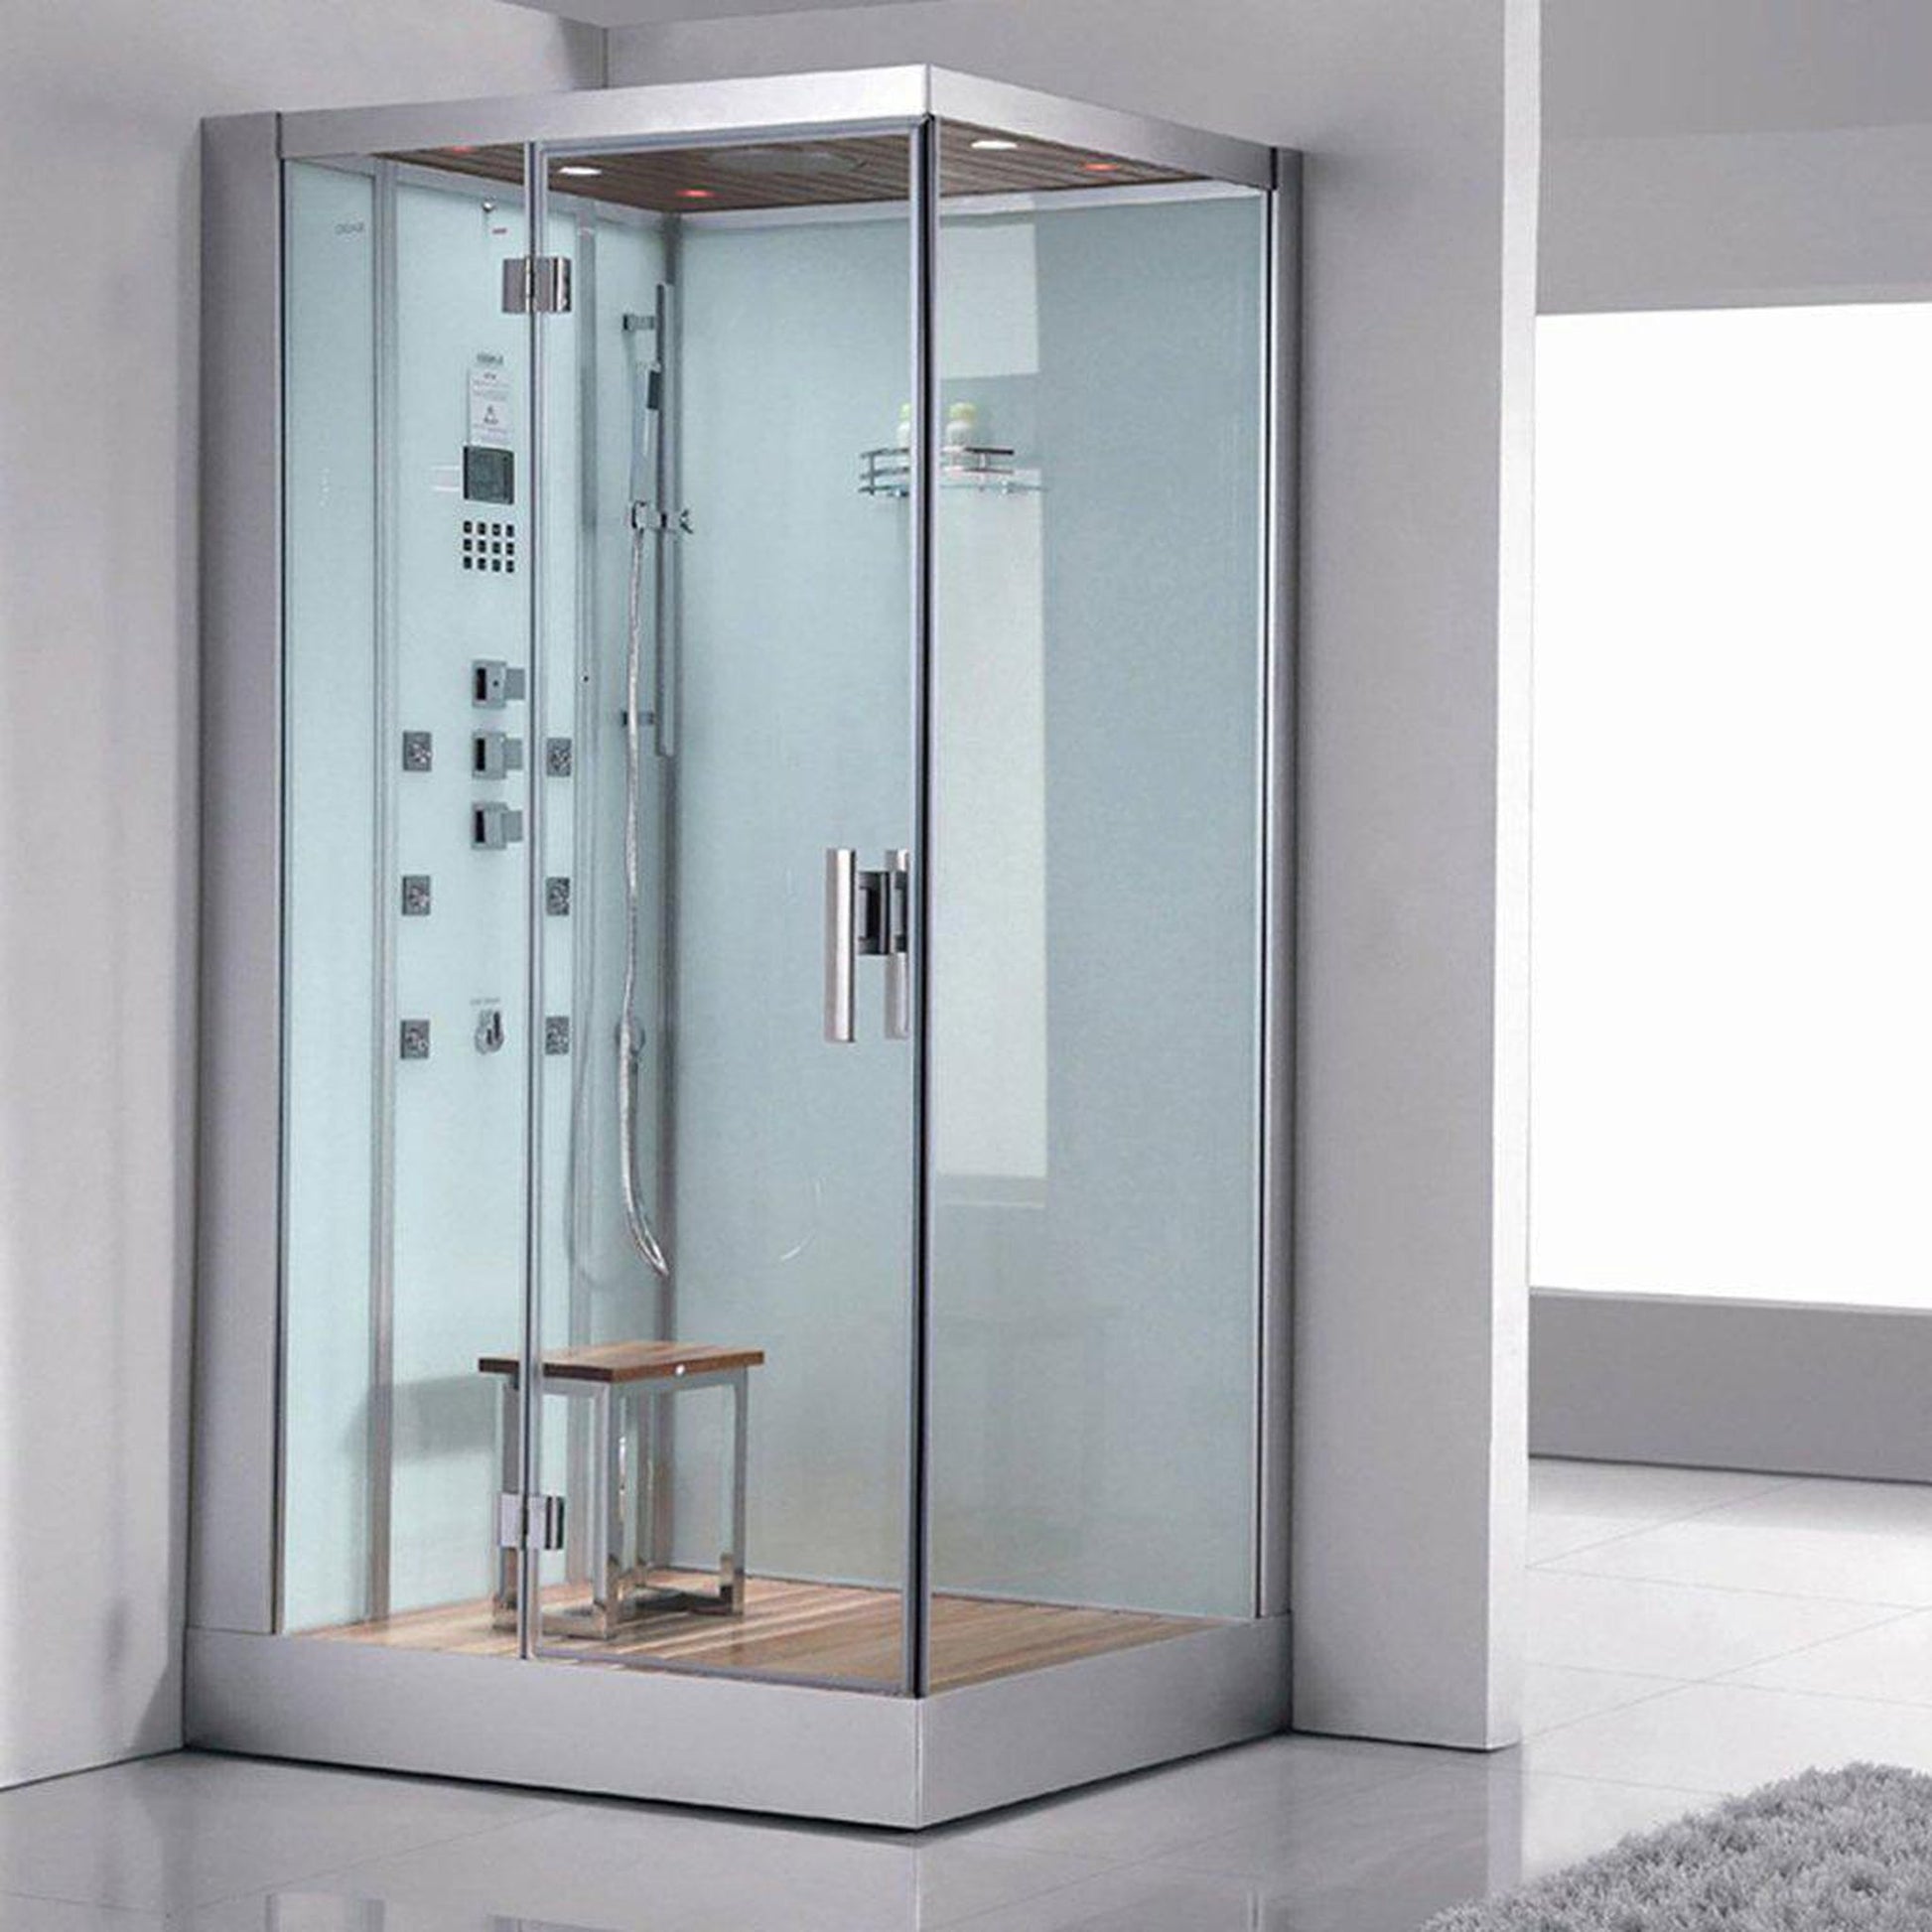 Platinum 47" x 35" x 89" Two-Person White Framed Rectangle Walk-In Steam Shower With Left Handed Control Panel Configuration Hinged Door 6 Massage Jets & LED Chromatherapy Lighting